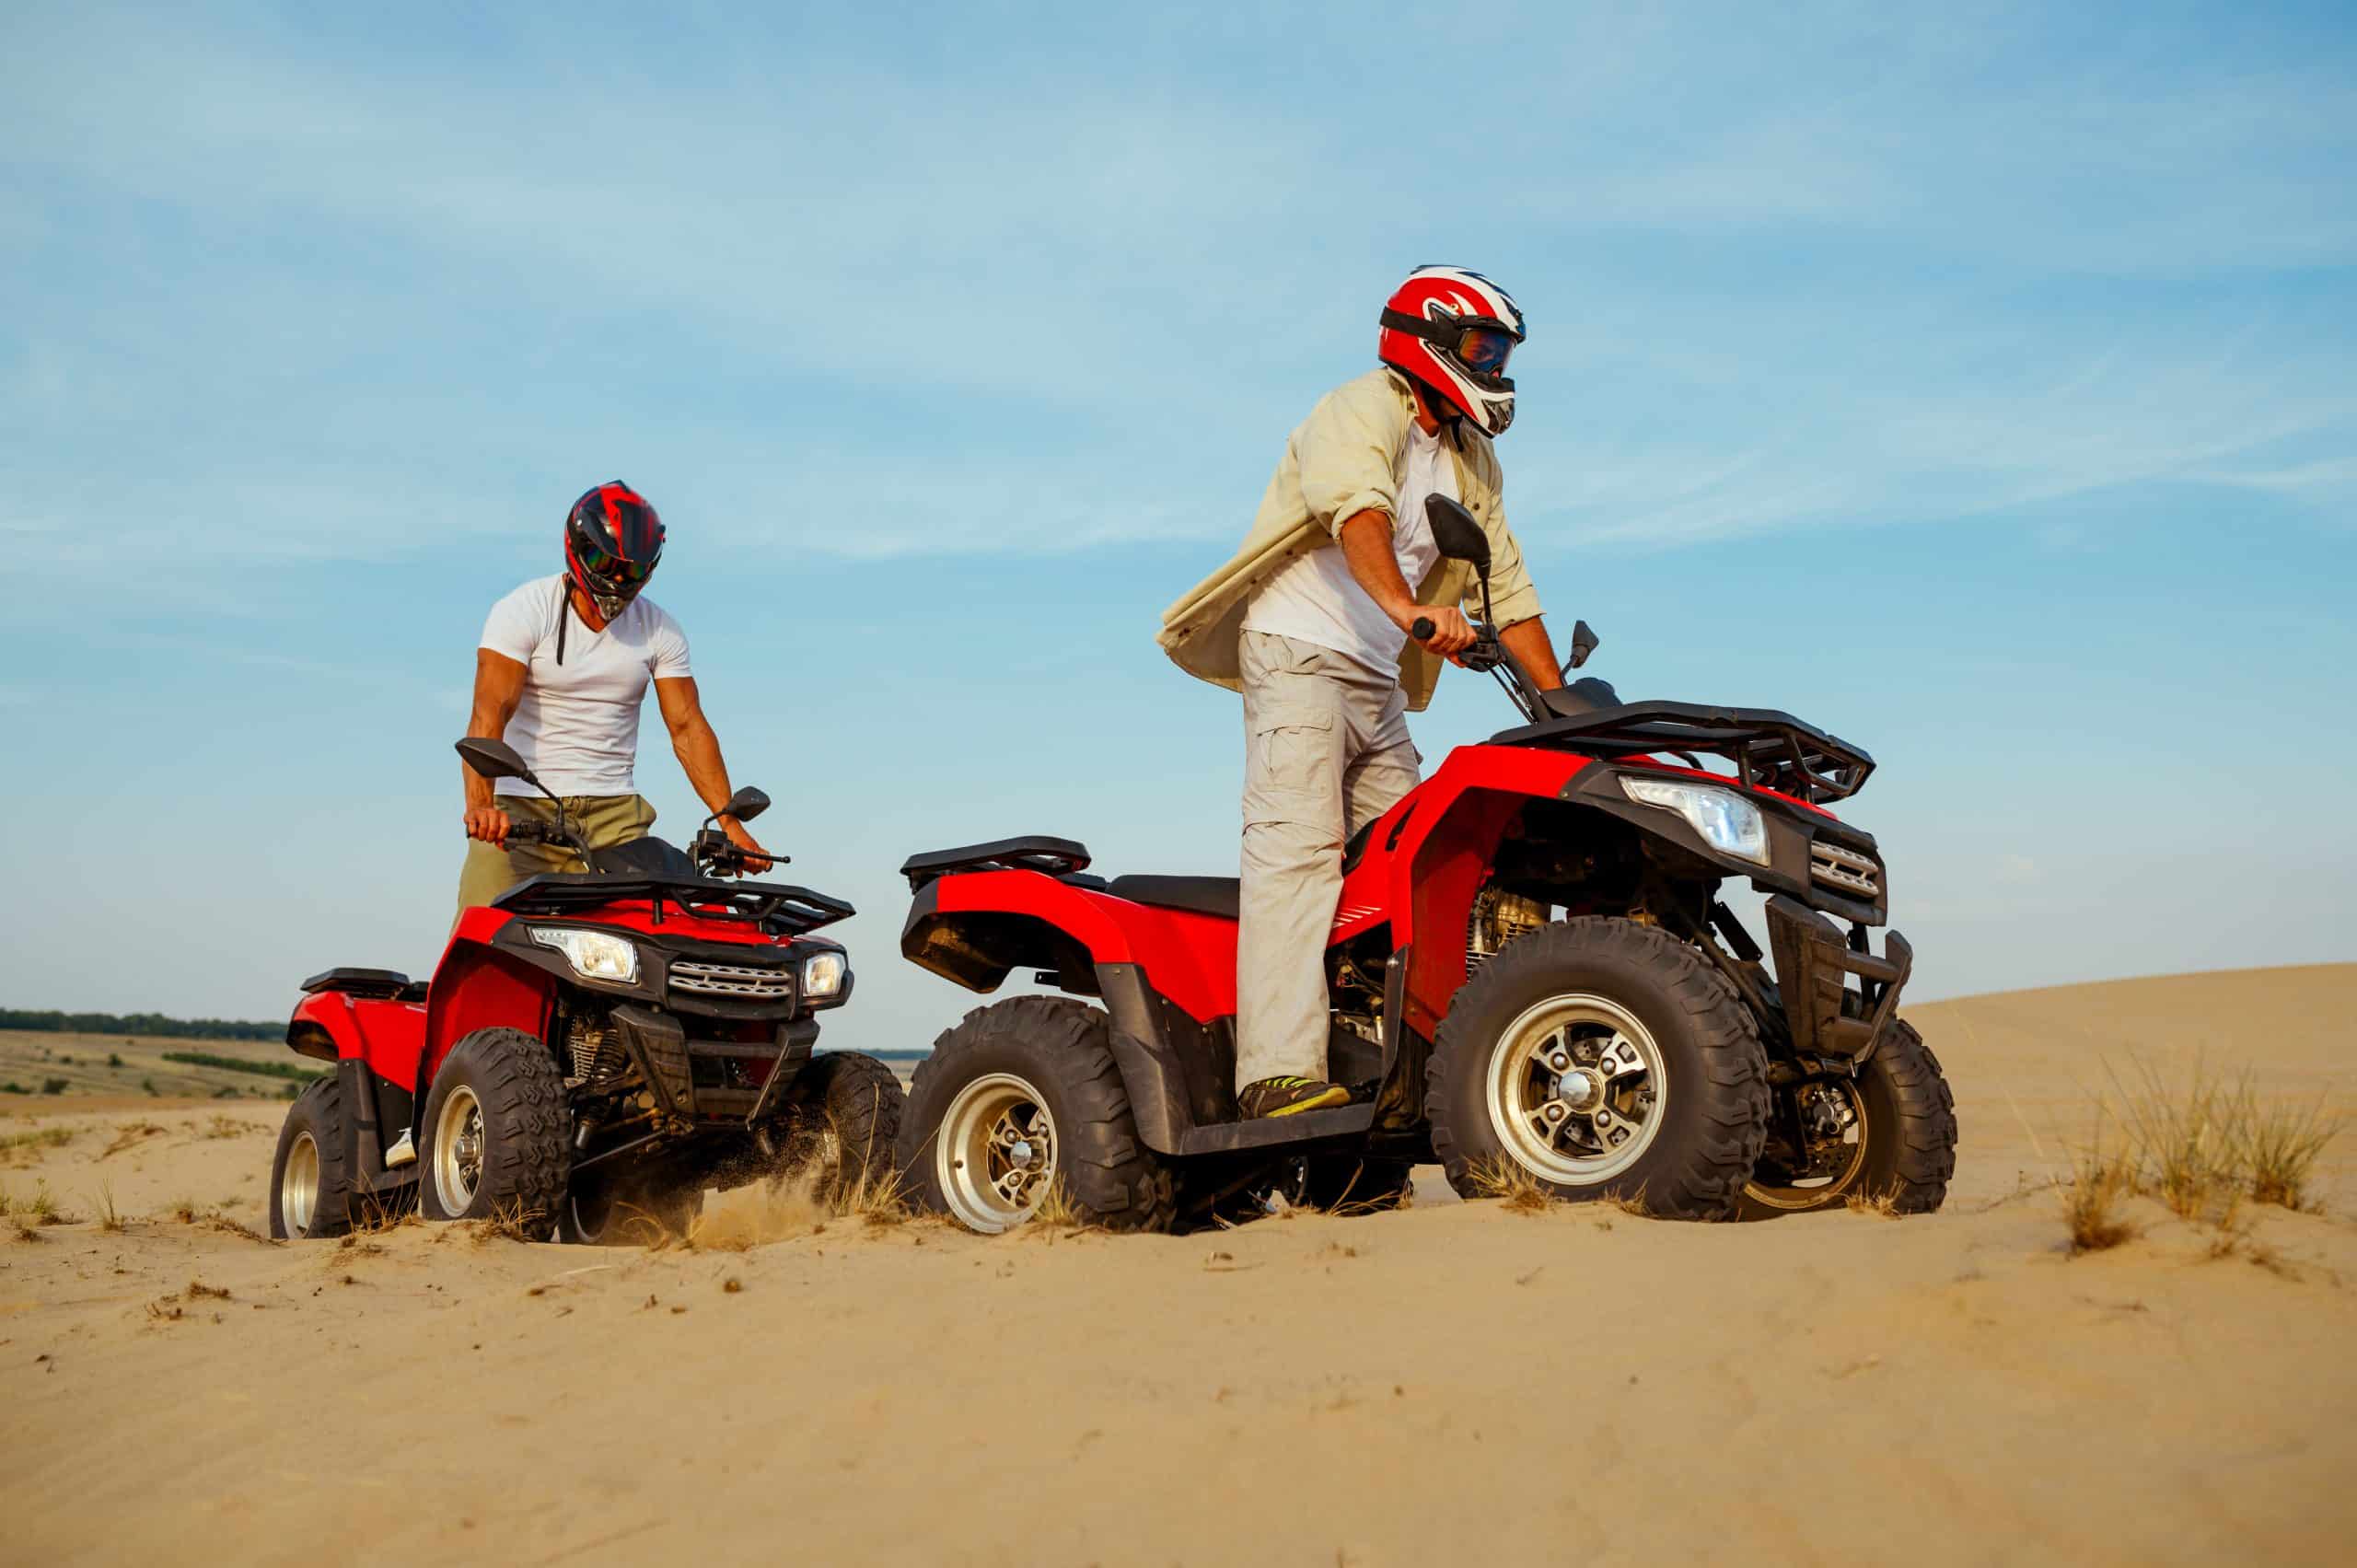 ATV and Off-Road Vehicle Insurance policies from LA Insurance of Colorado